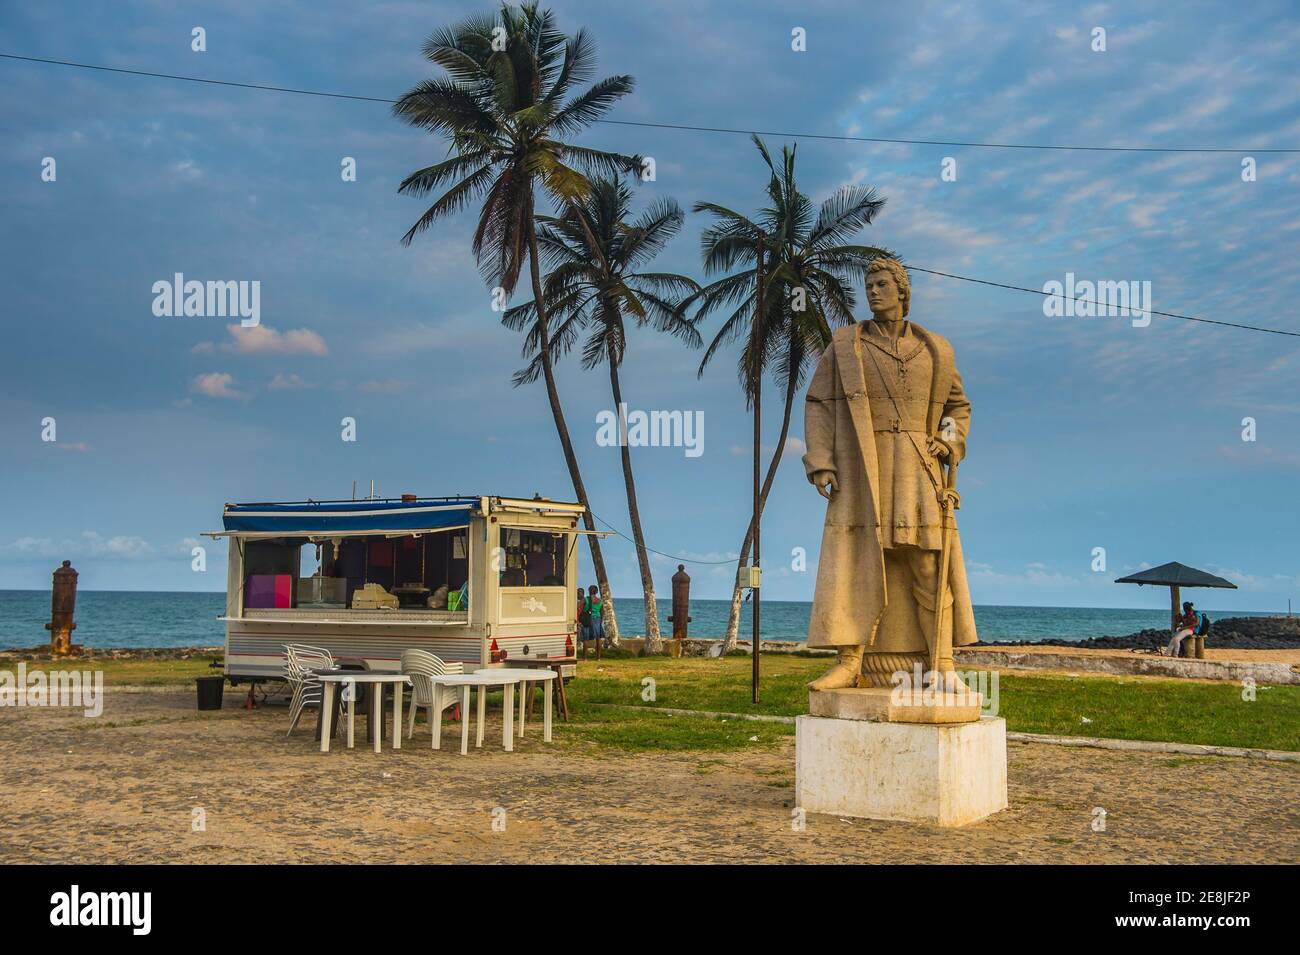 Statues for the Independence before the San Sebastian Fort, City of Sao Tome, Sao Tome and Principe, Atlantic ocean Stock Photo